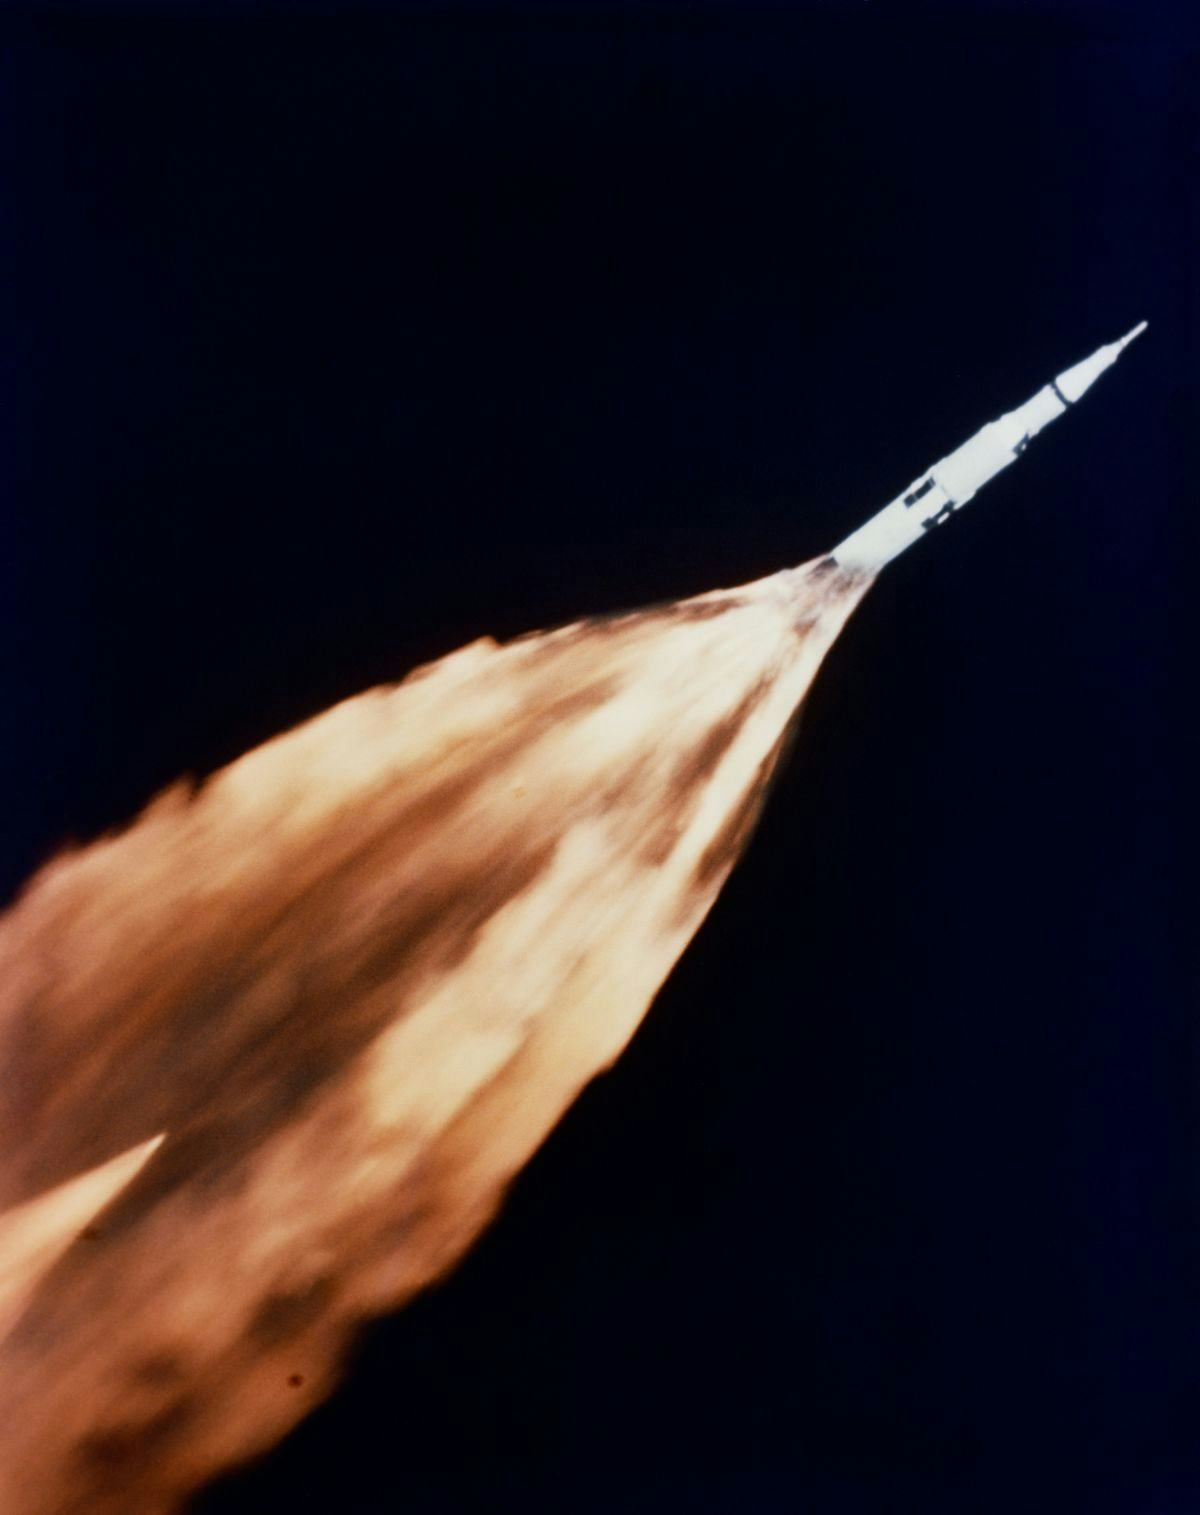 A rocket in space flight with long tail of flames